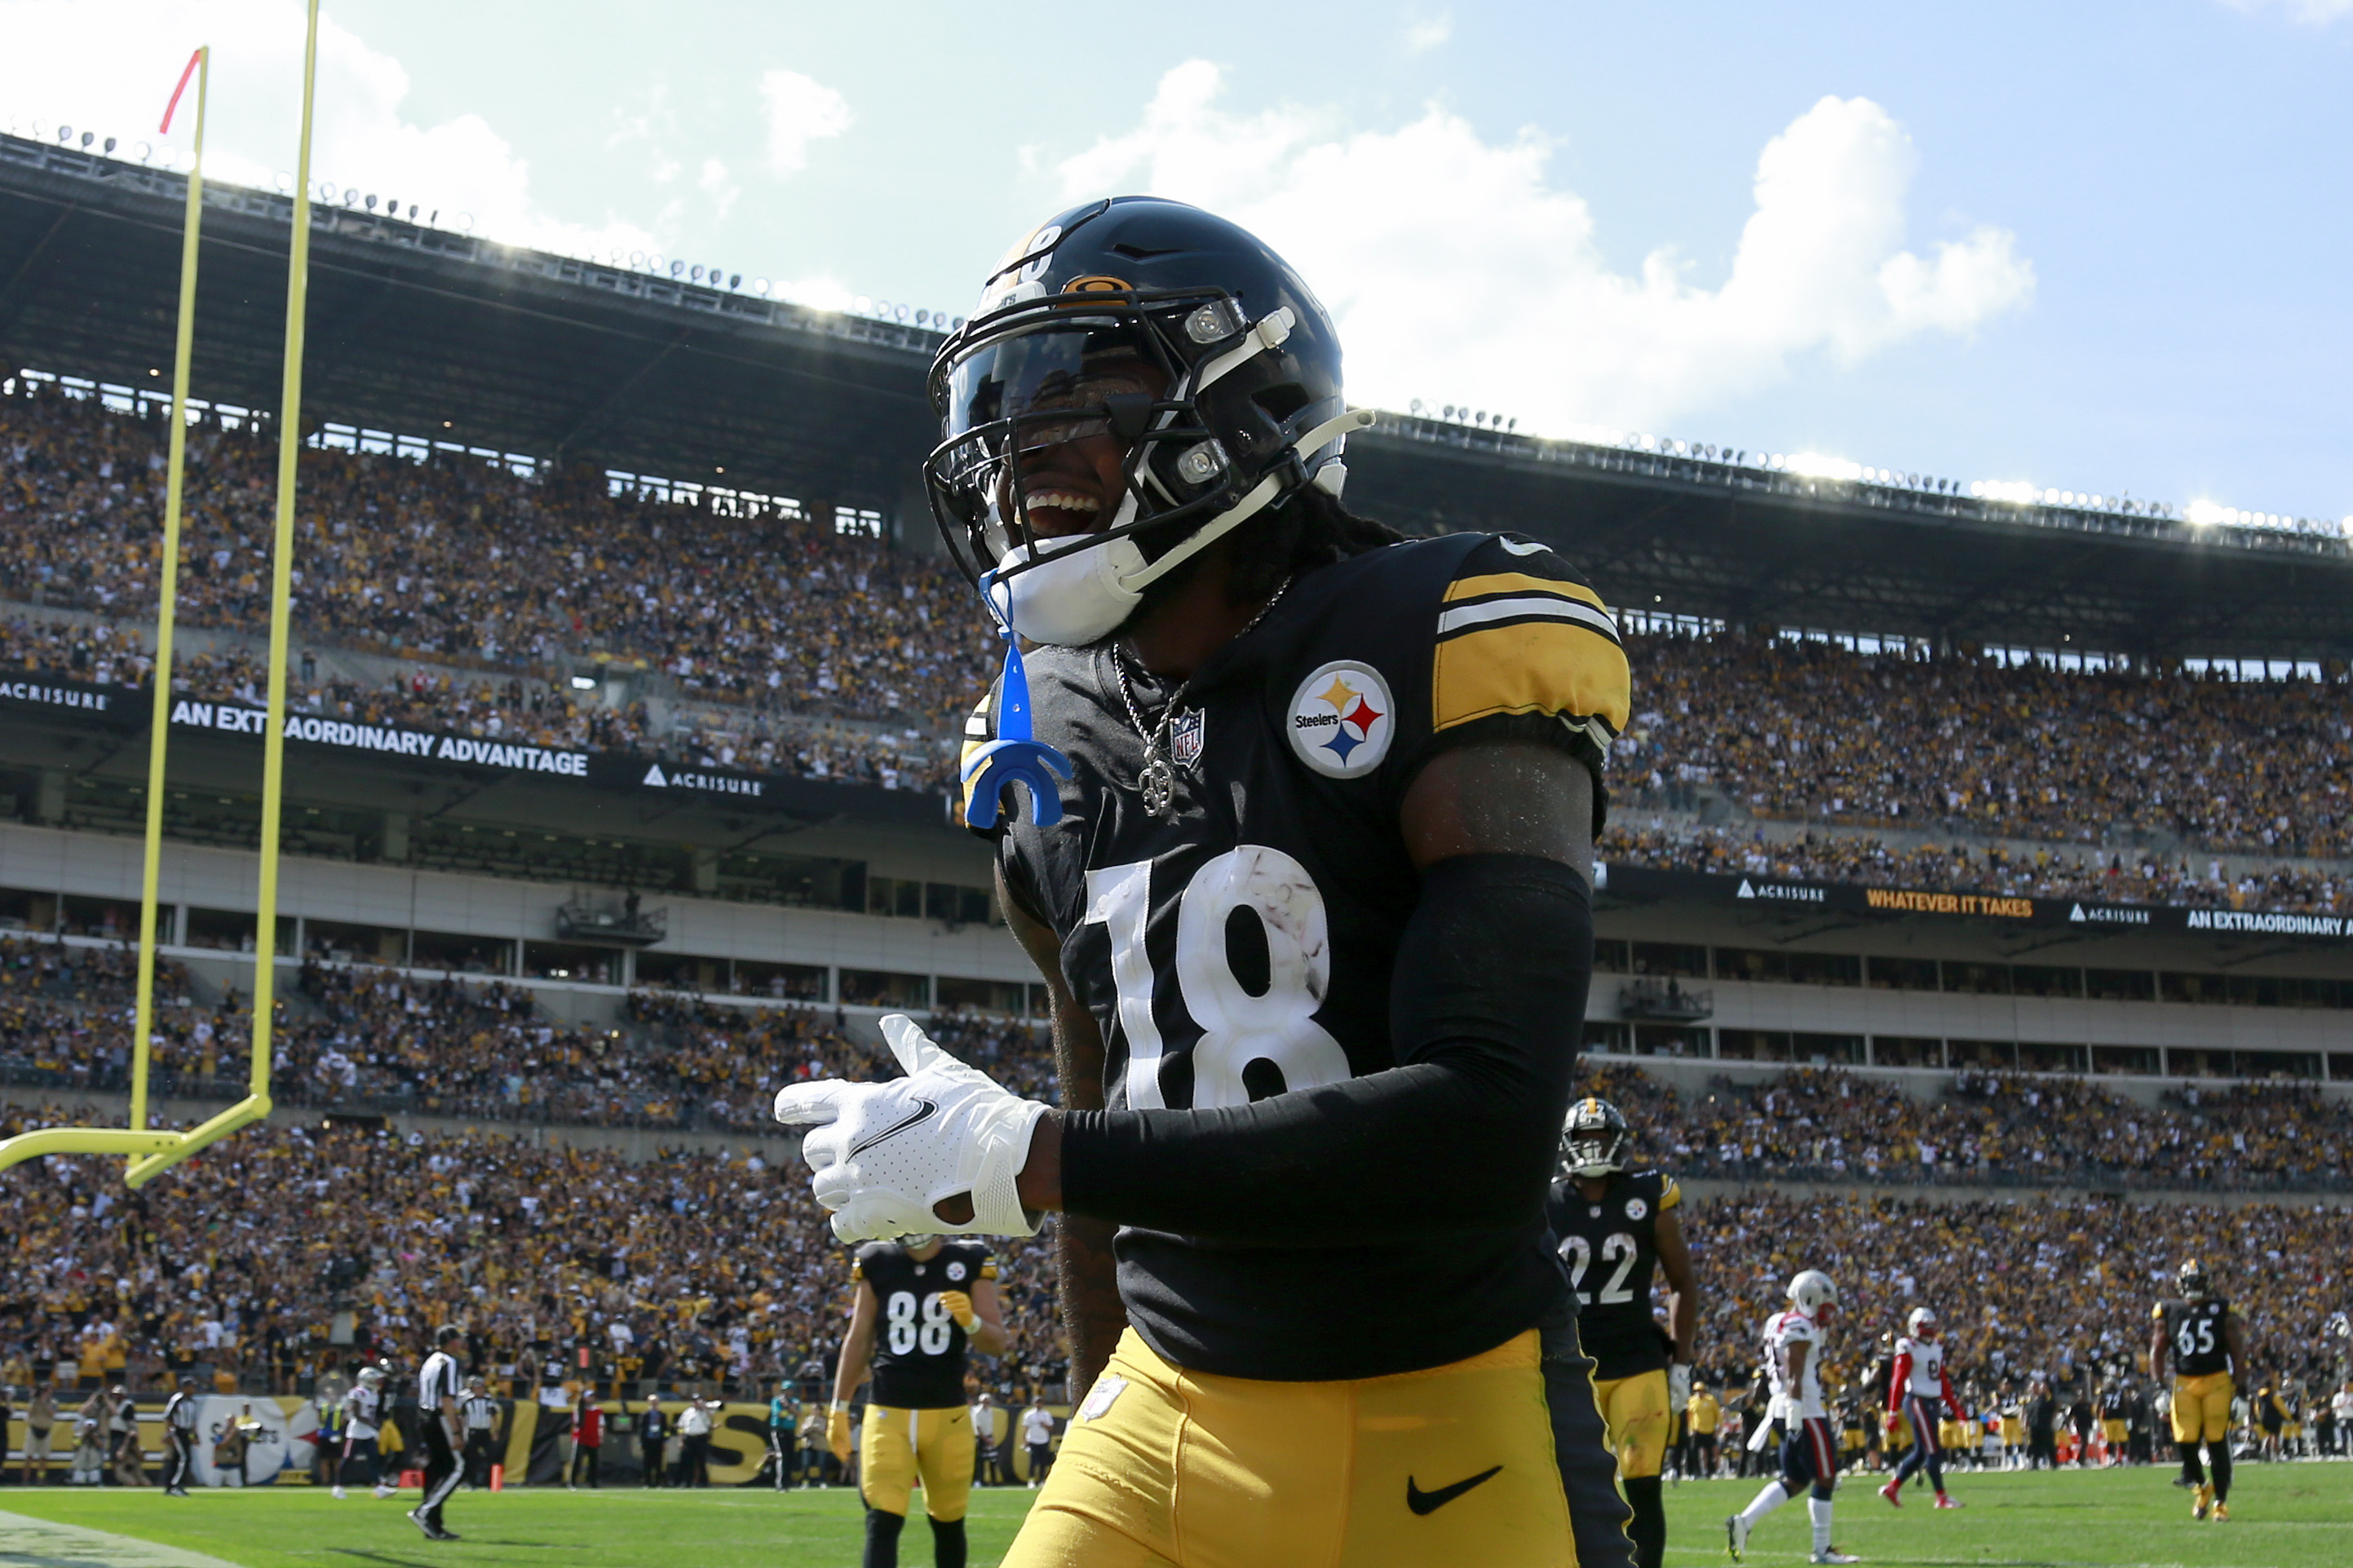 Diontae Johnson #18 of the Pittsburgh Steelers celebrates after a two point conversion during the second half gane at Acrisure Stadium on September 18, 2022 in Pittsburgh, Pennsylvania.